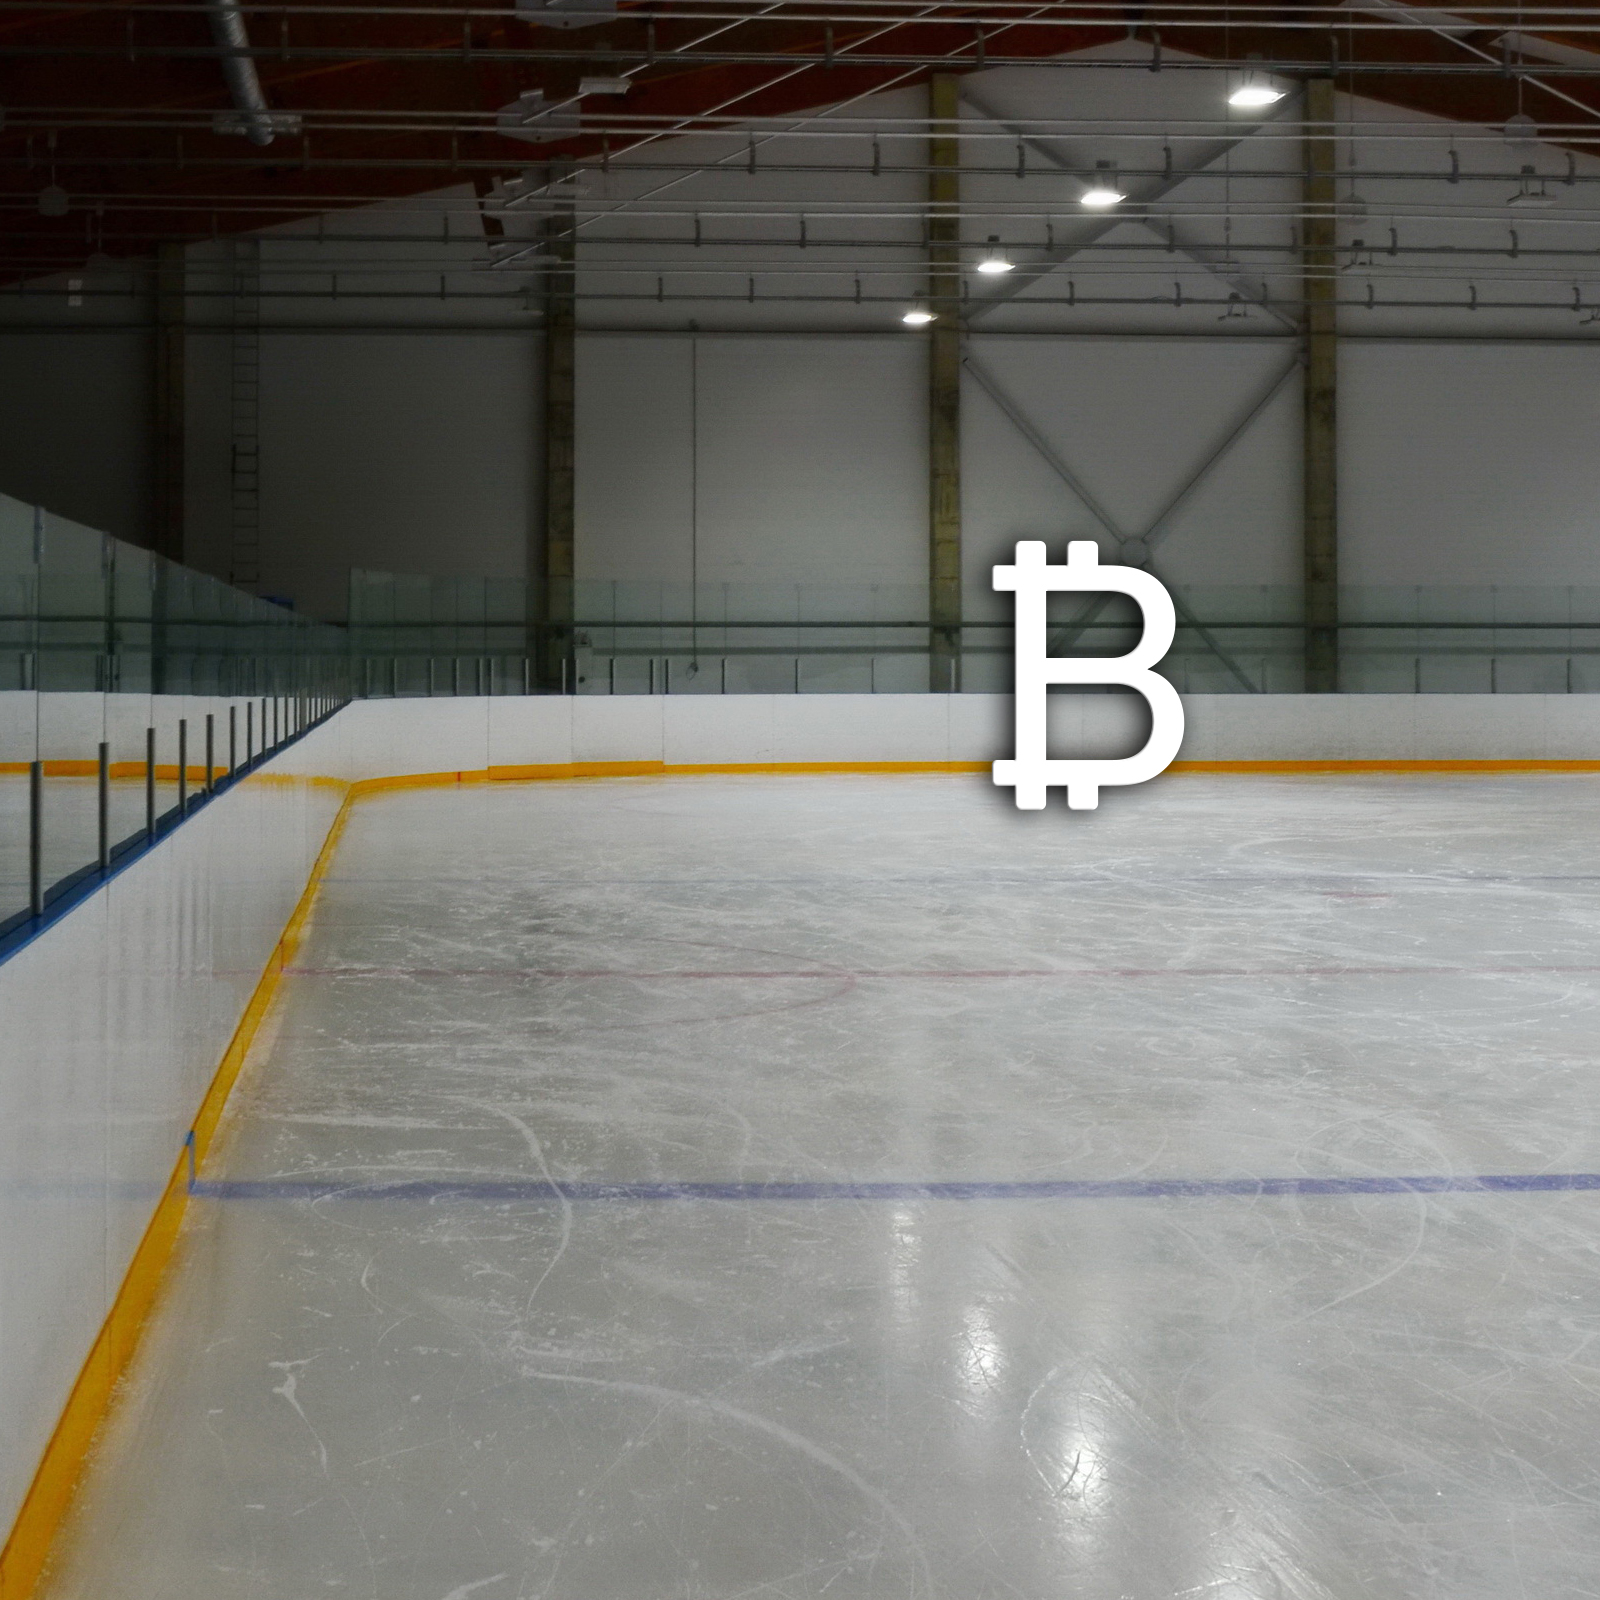 Danish Billionaire Renames the Rungsted Capital Ice Rink to 'Bitcoin Arena'